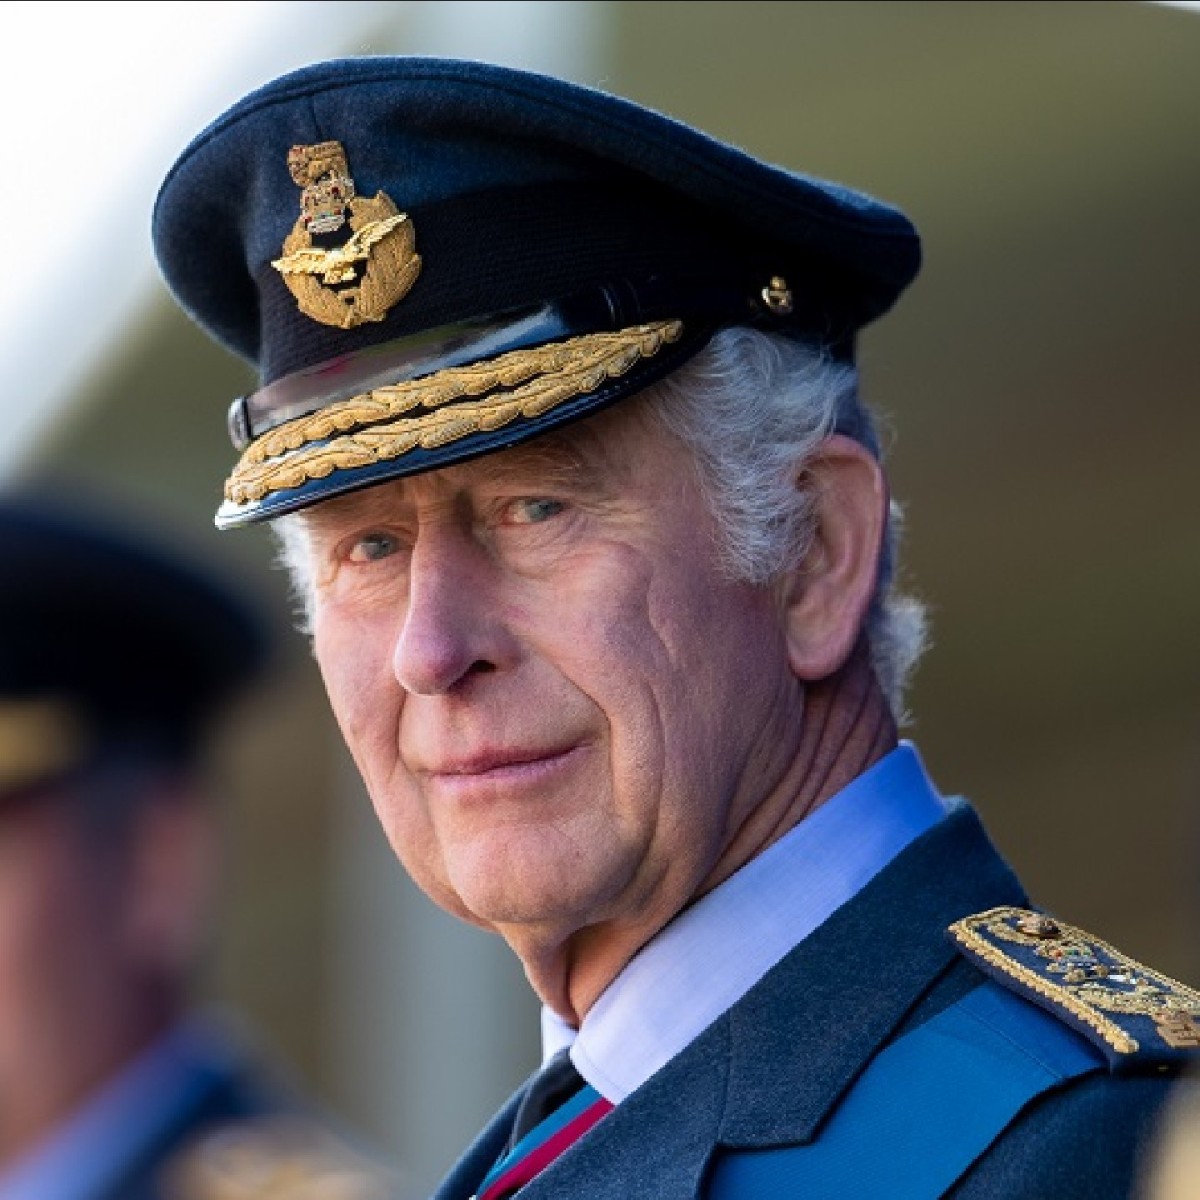 All at the RAF Benevolent Fund are absolutely delighted and honoured that His Majesty King Charles III has accepted the Patronage of the RAF Benevolent Fund.